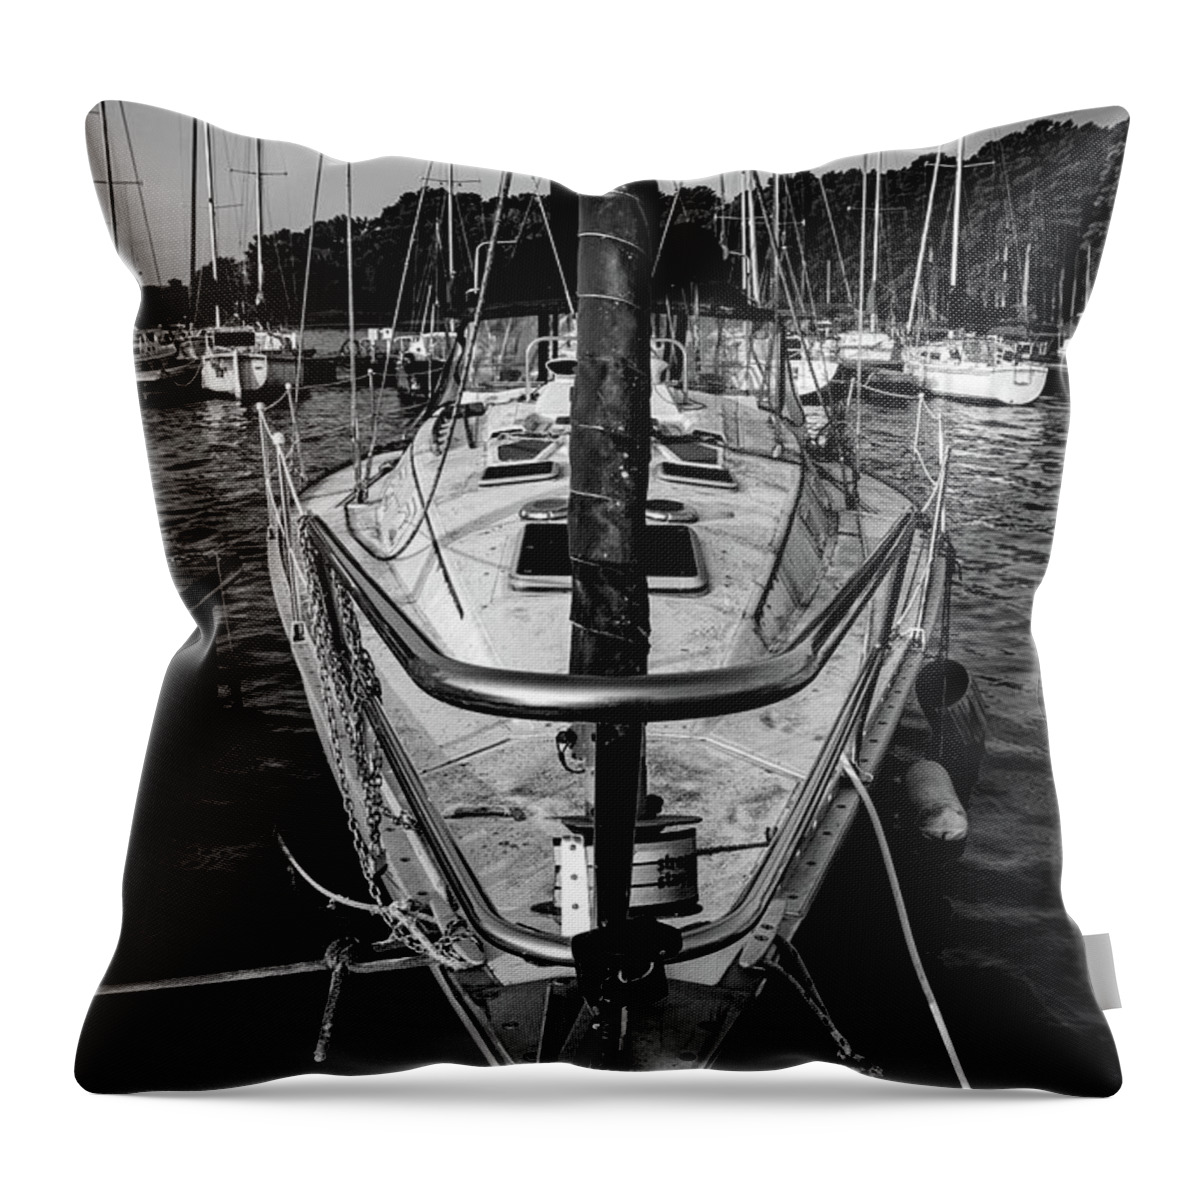 Boat Throw Pillow featuring the photograph Docked by Jamie Tyler